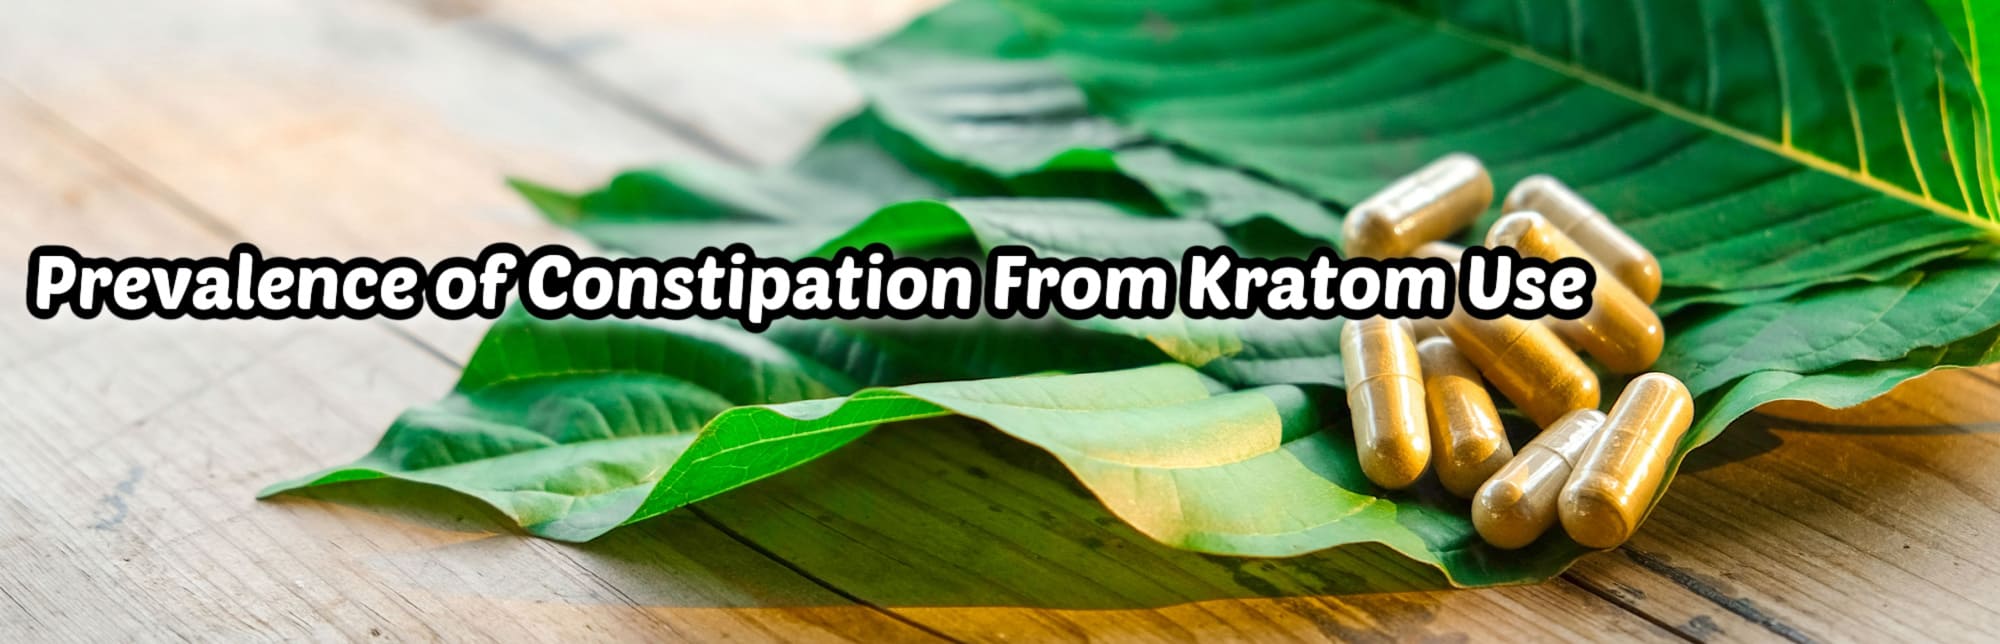 image of prevalence of constipation from kratom use